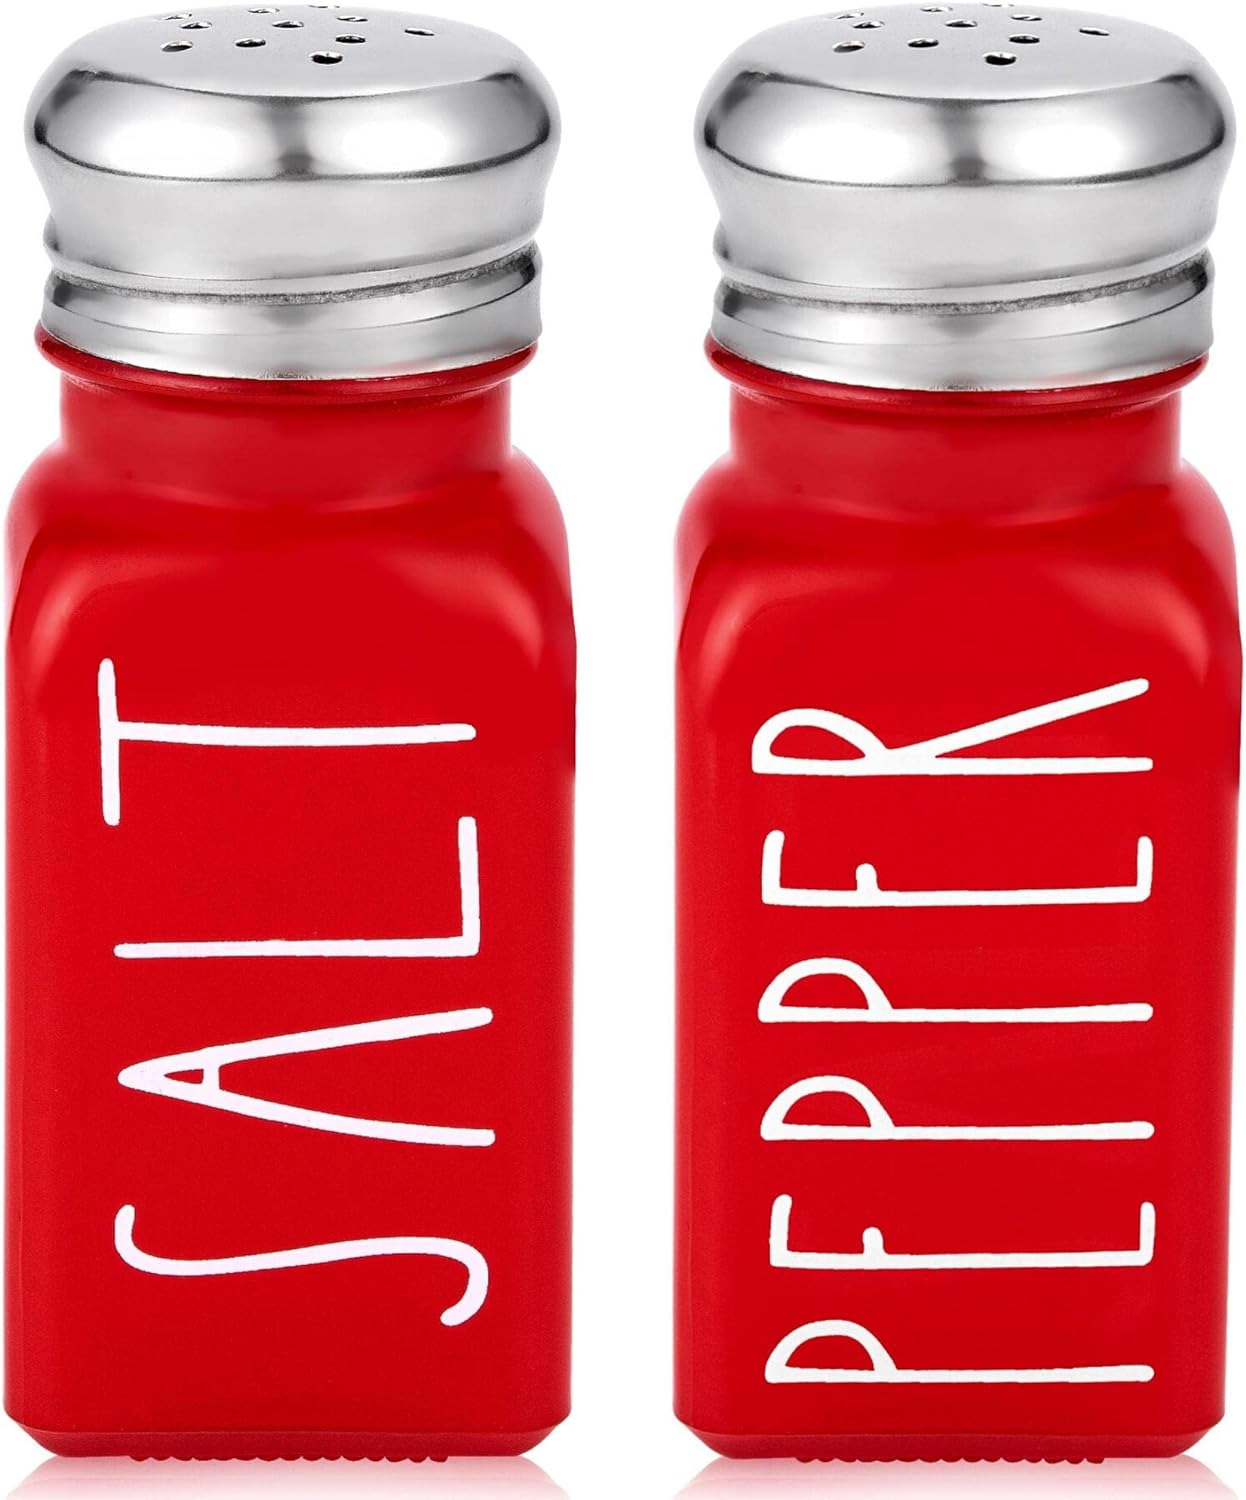 Red Salt and Pepper Shakers Set by Brighter Barns - Farmhouse Red Kitchen Decor 